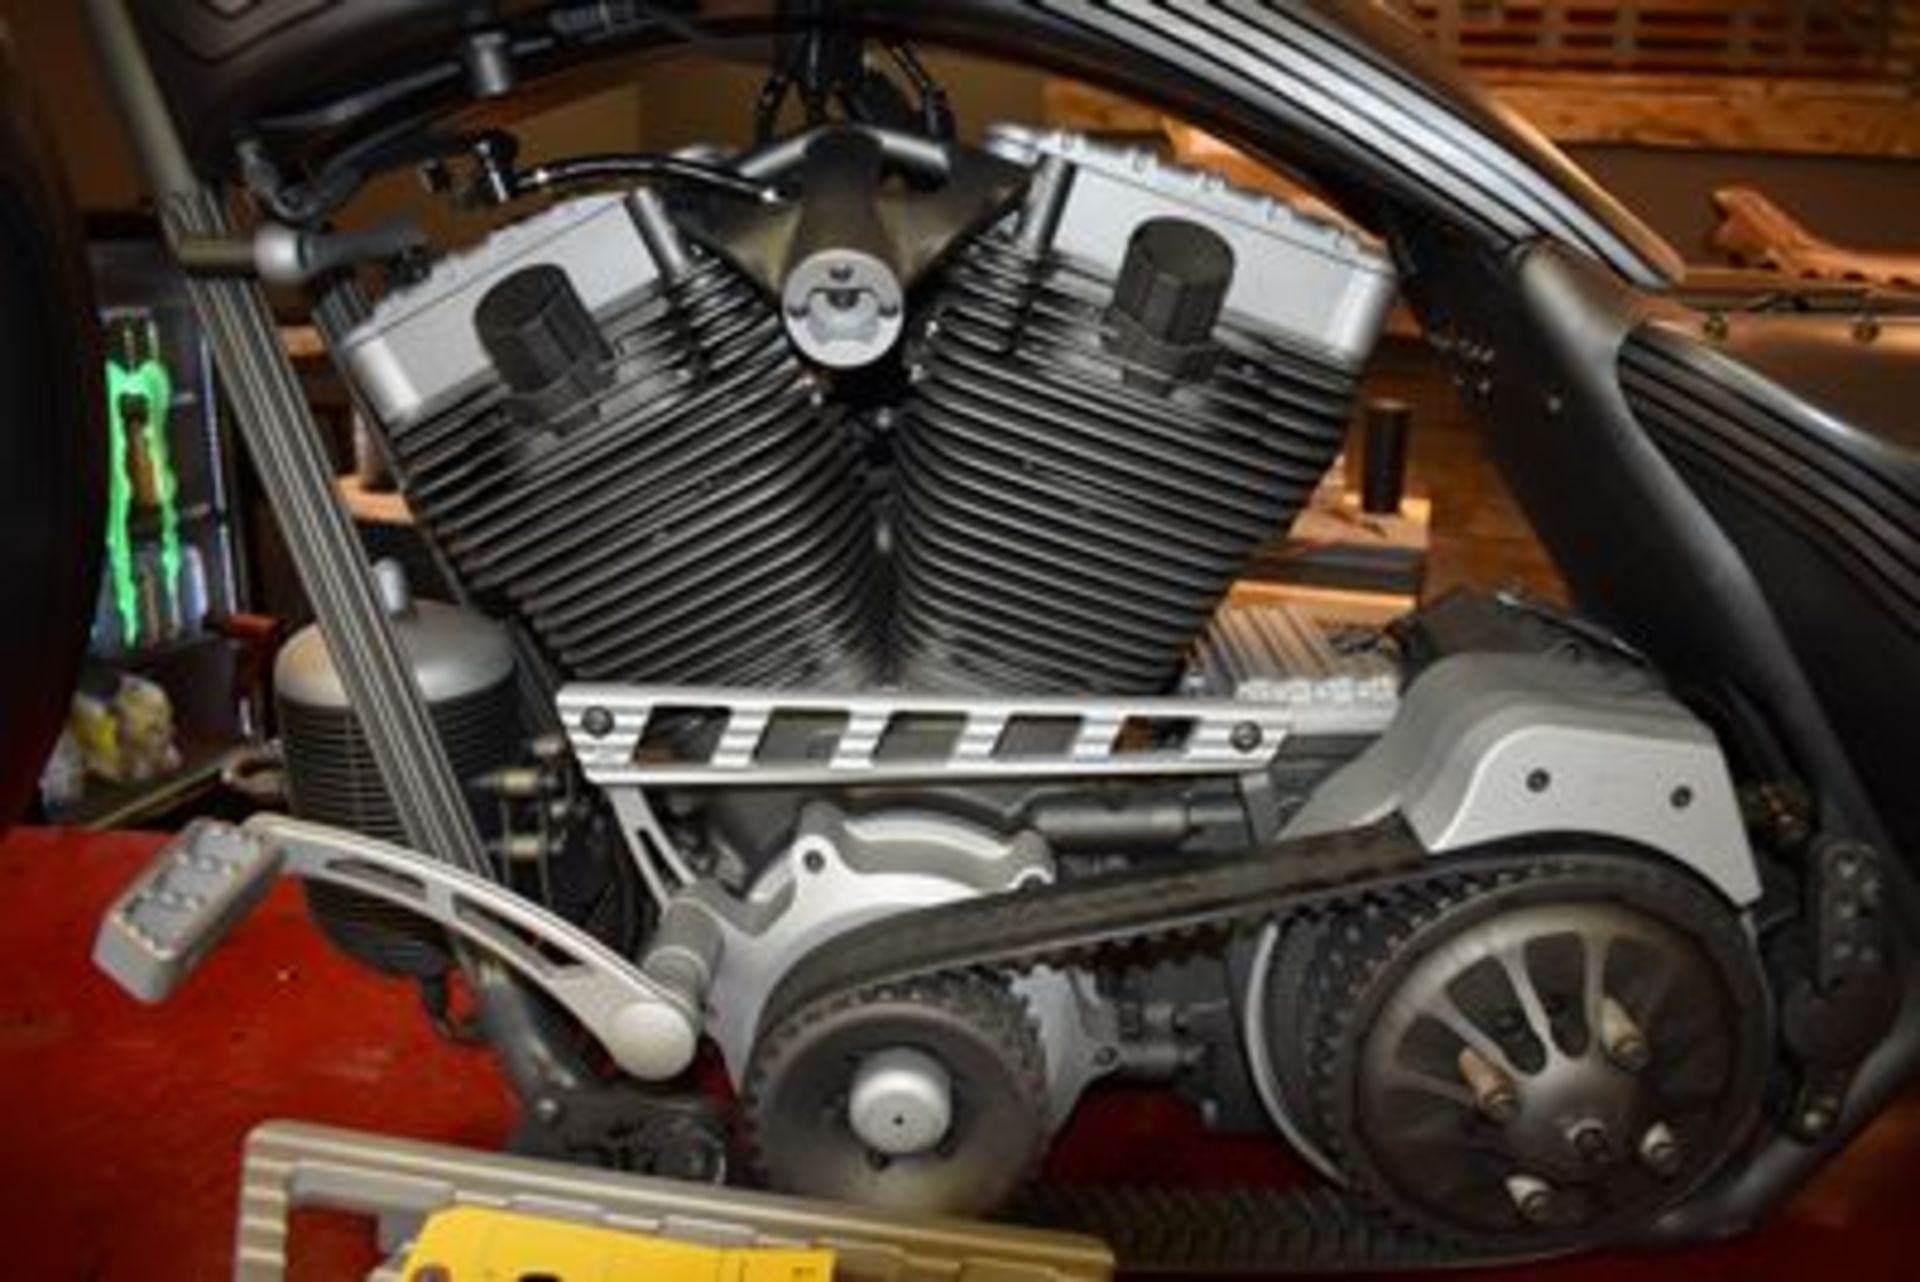 2015 HARLEY DAVIDSON ROAD KING, RP3, STEAL IS REAL, ONE OFF HOT BIKE TOUR - Image 7 of 7